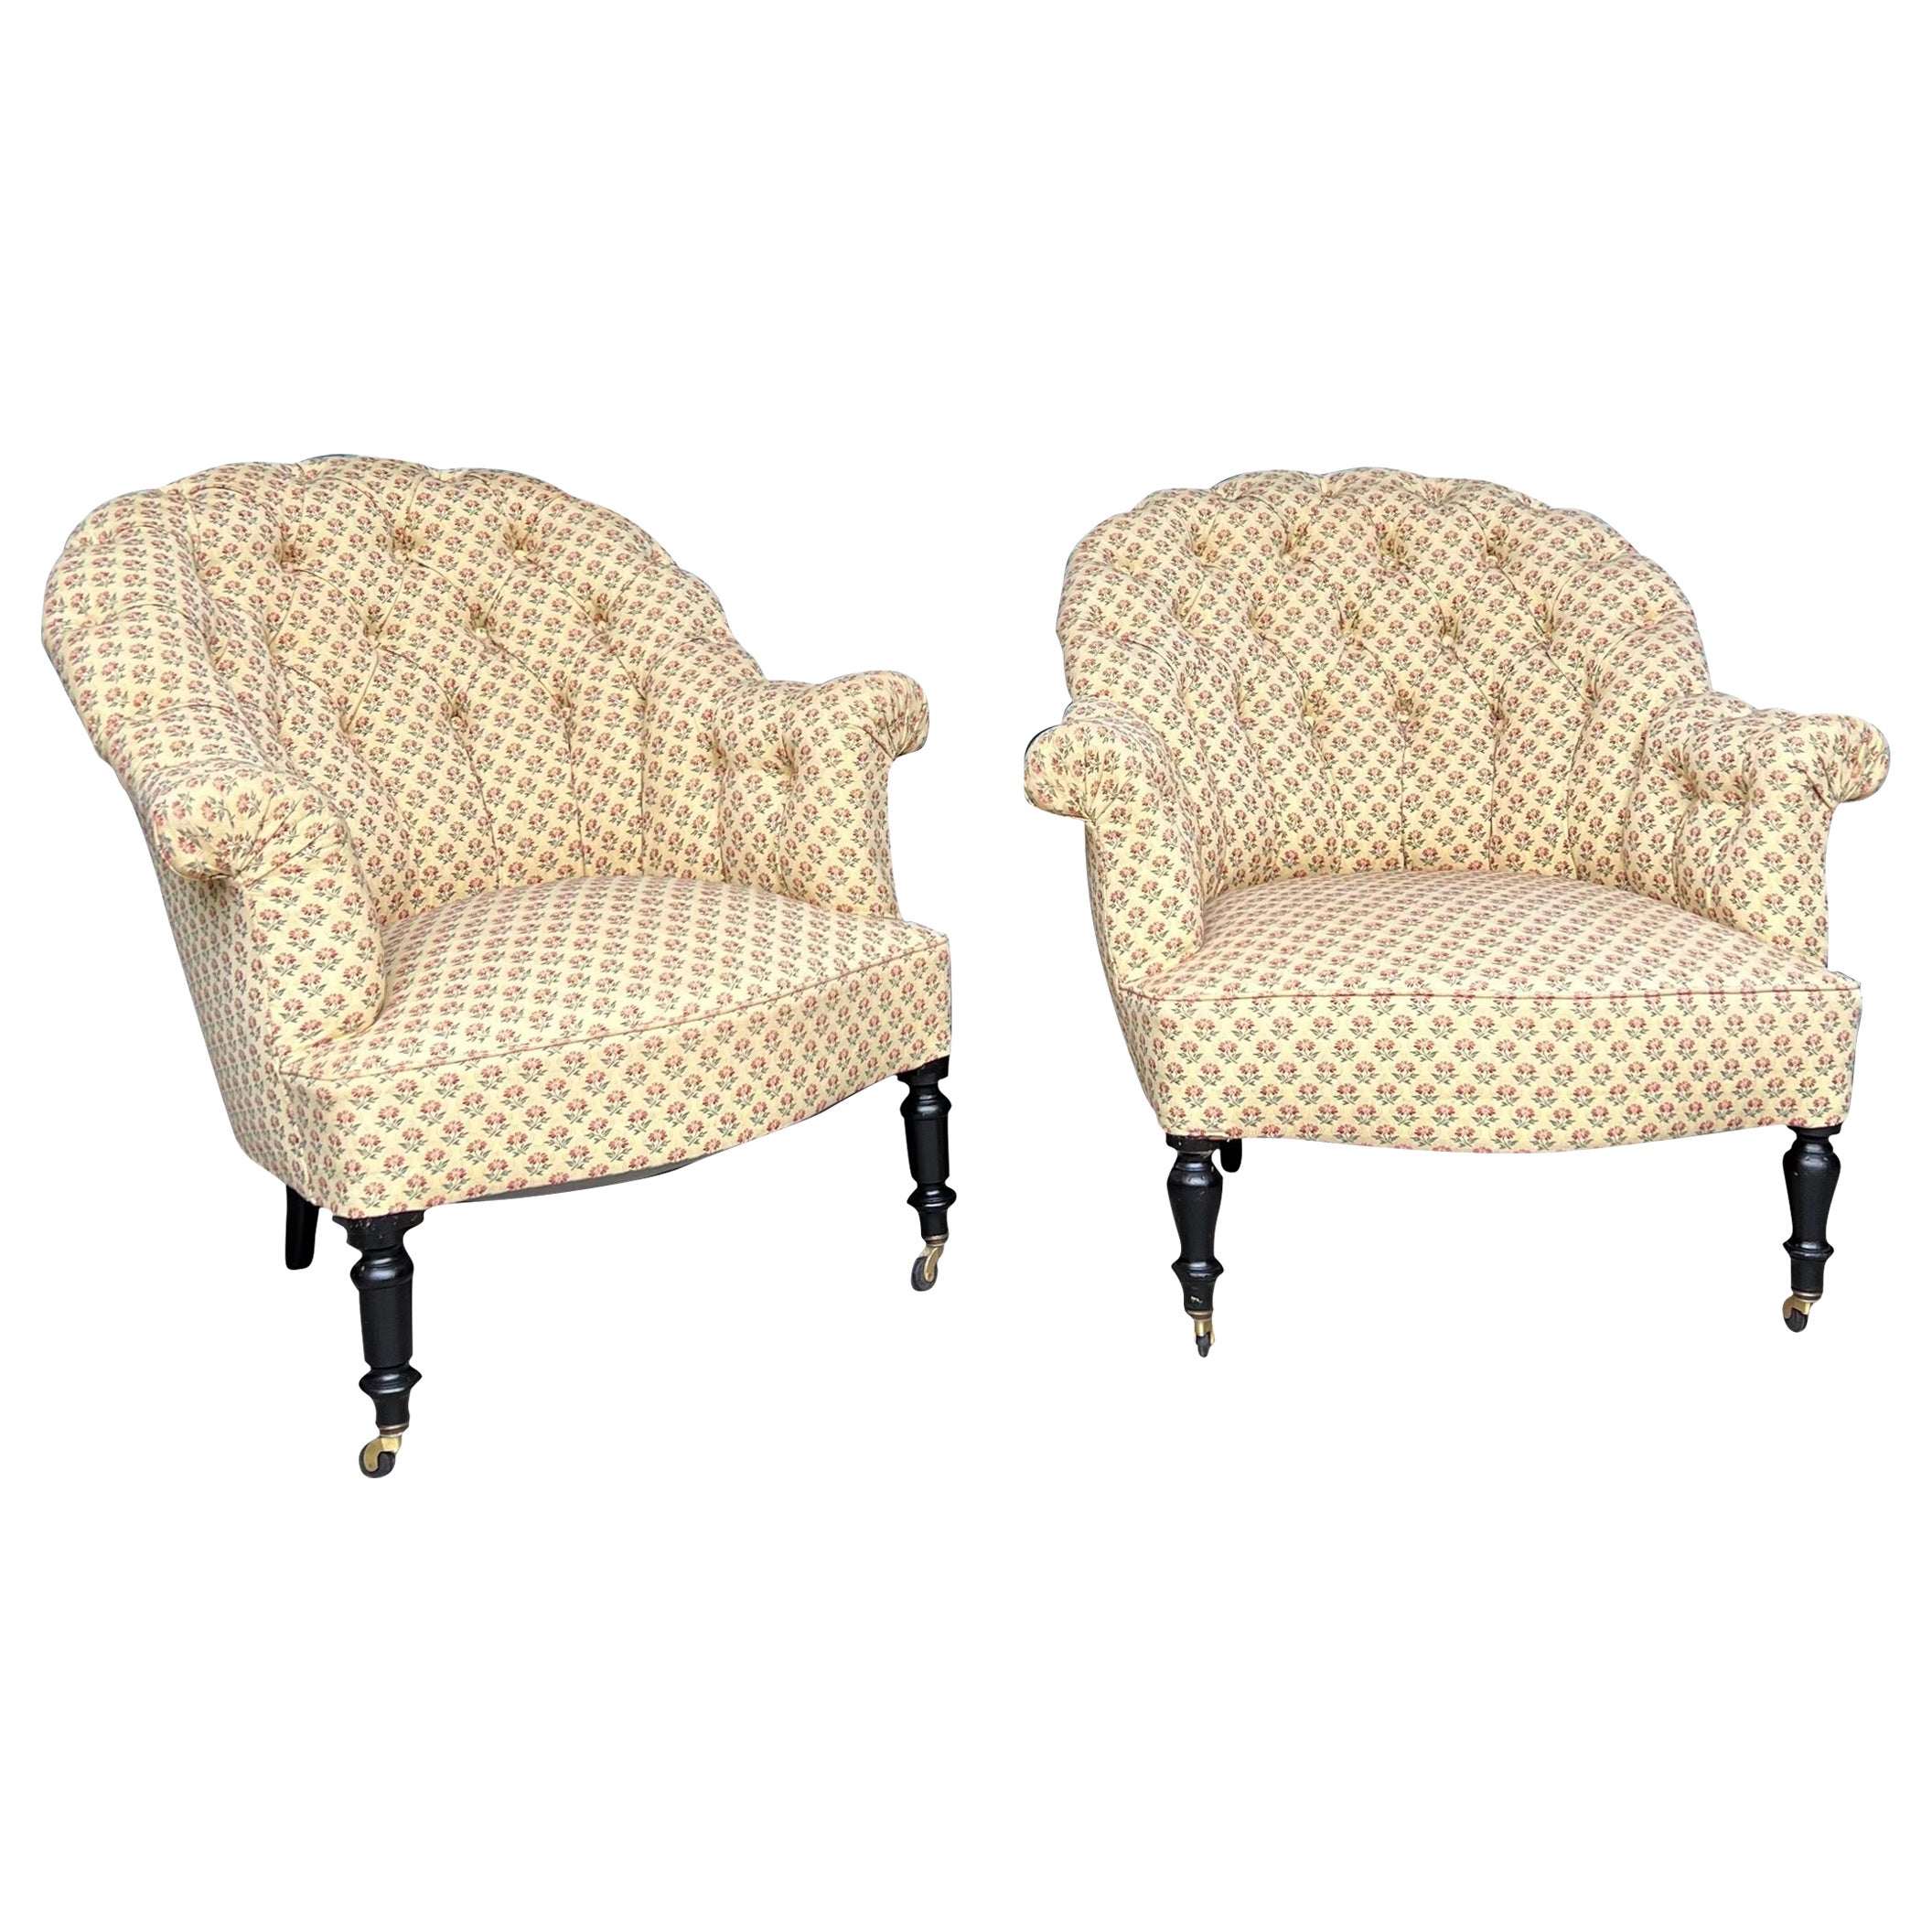 Pair of French Napoleon III Tufted Armchairs